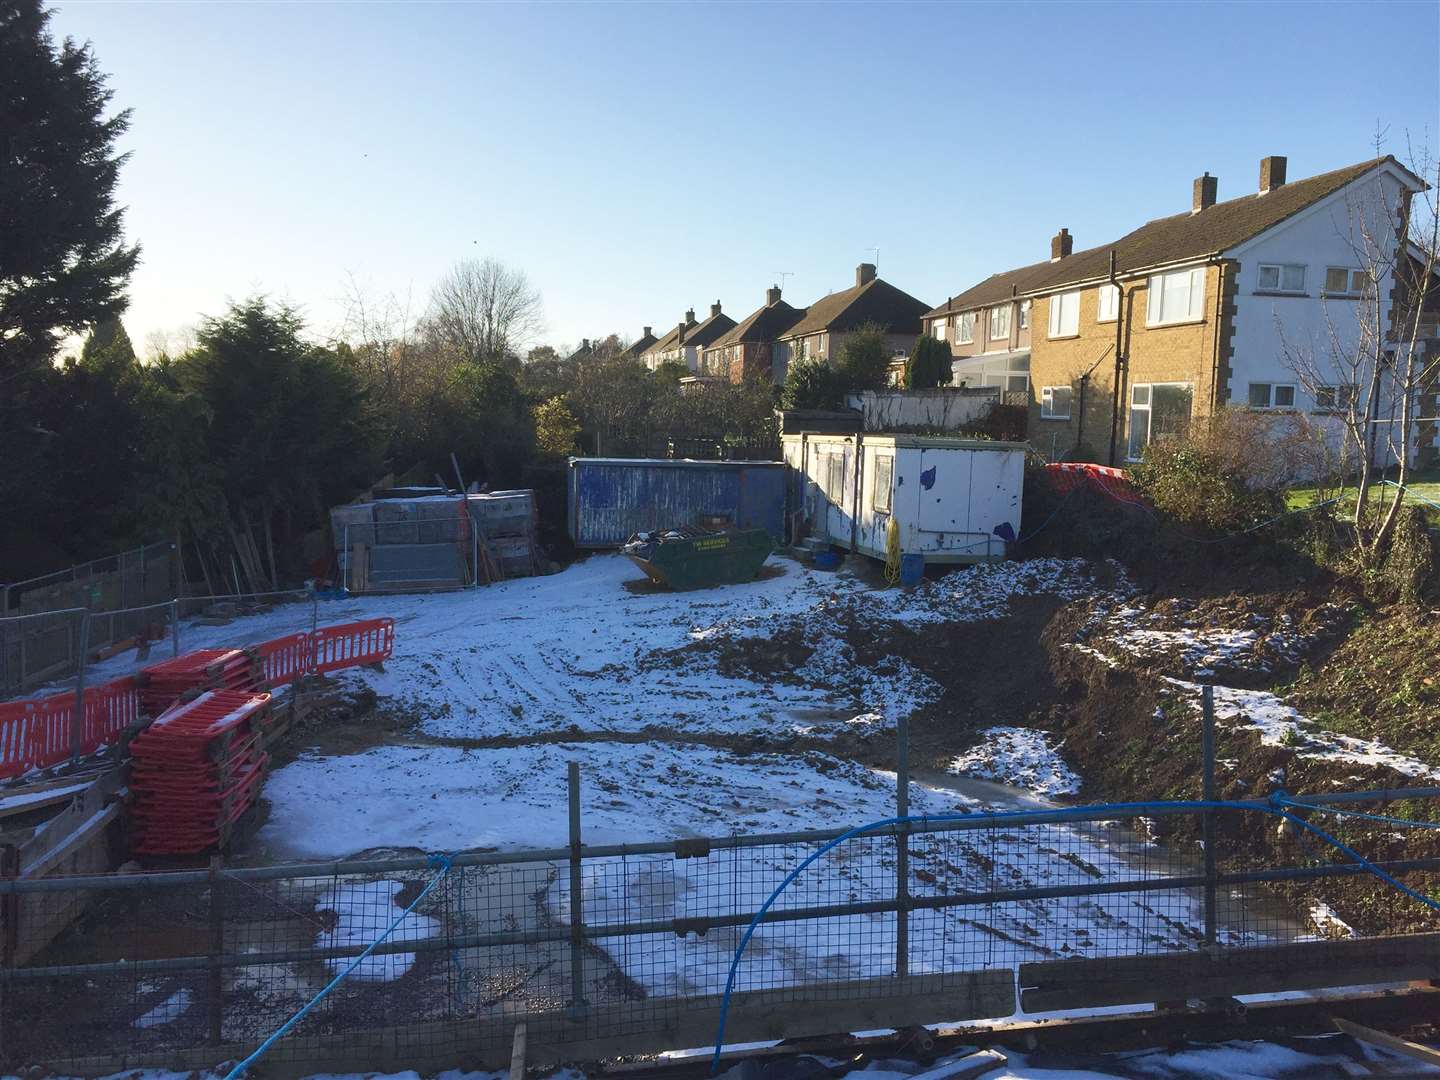 Construction work is taking place on the site in St Thomas Hill, Canterbury